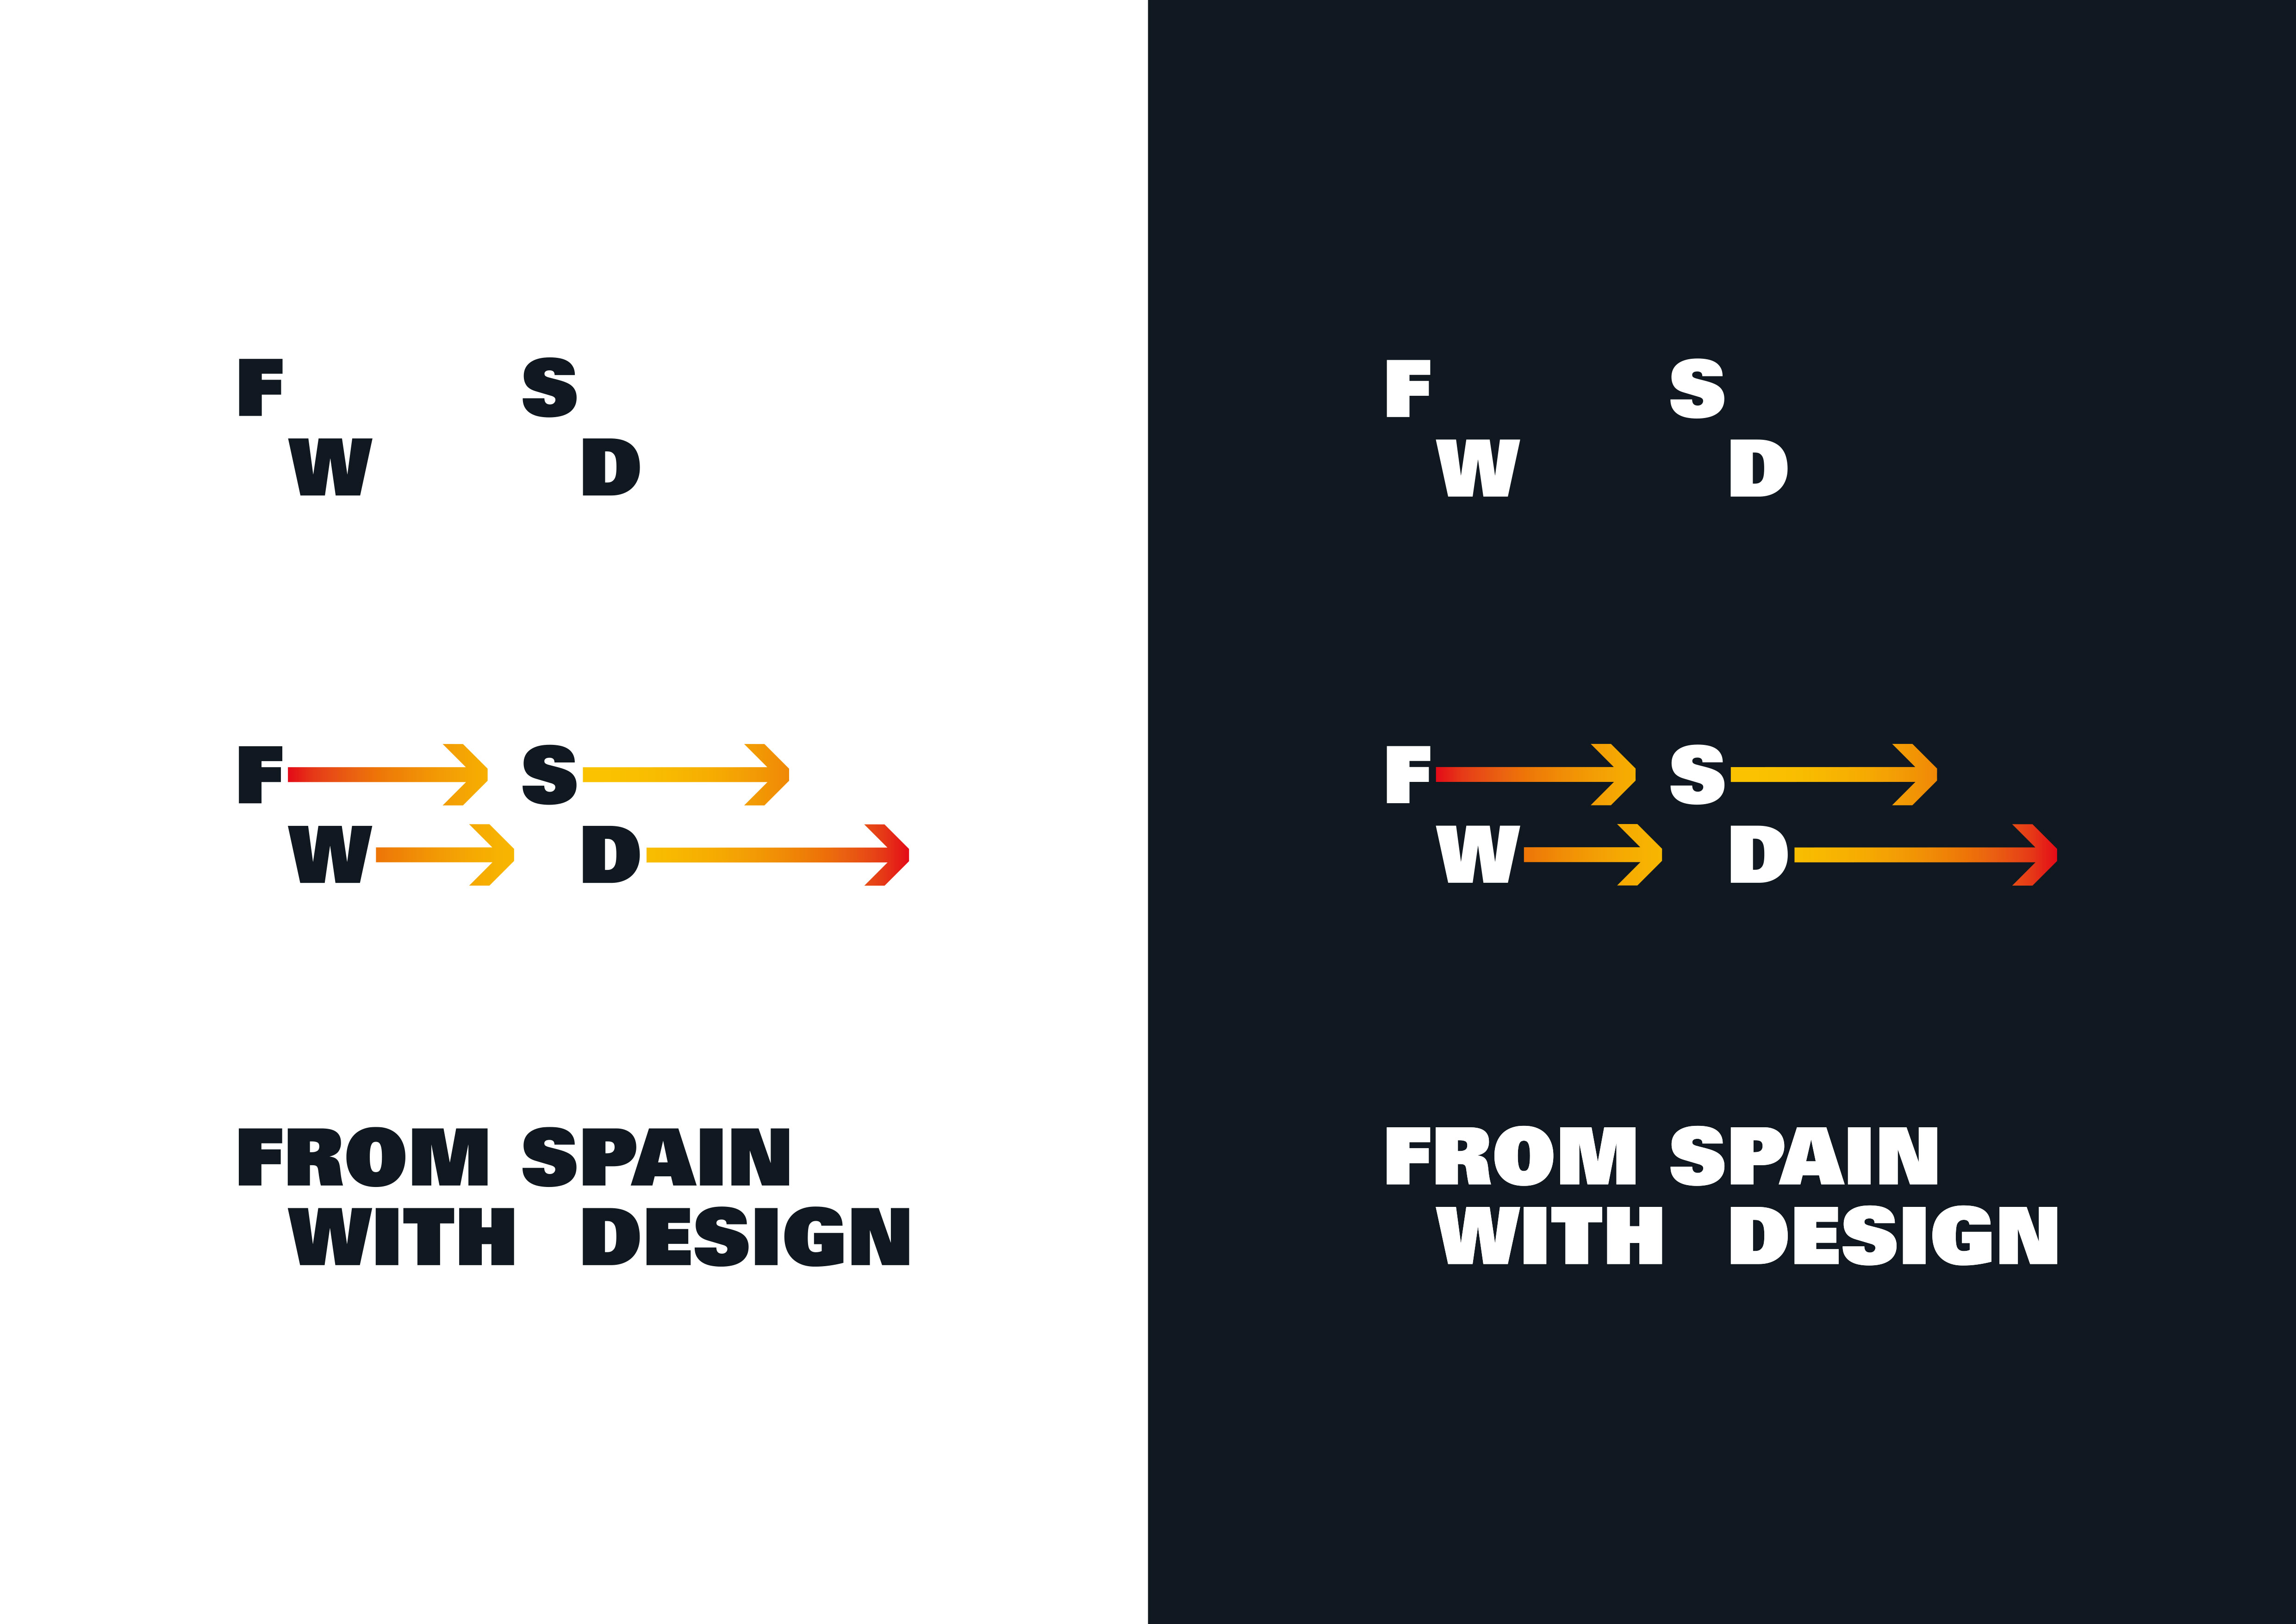 FROM SPAIN WITH DESIGN by Nueve - Creative Work